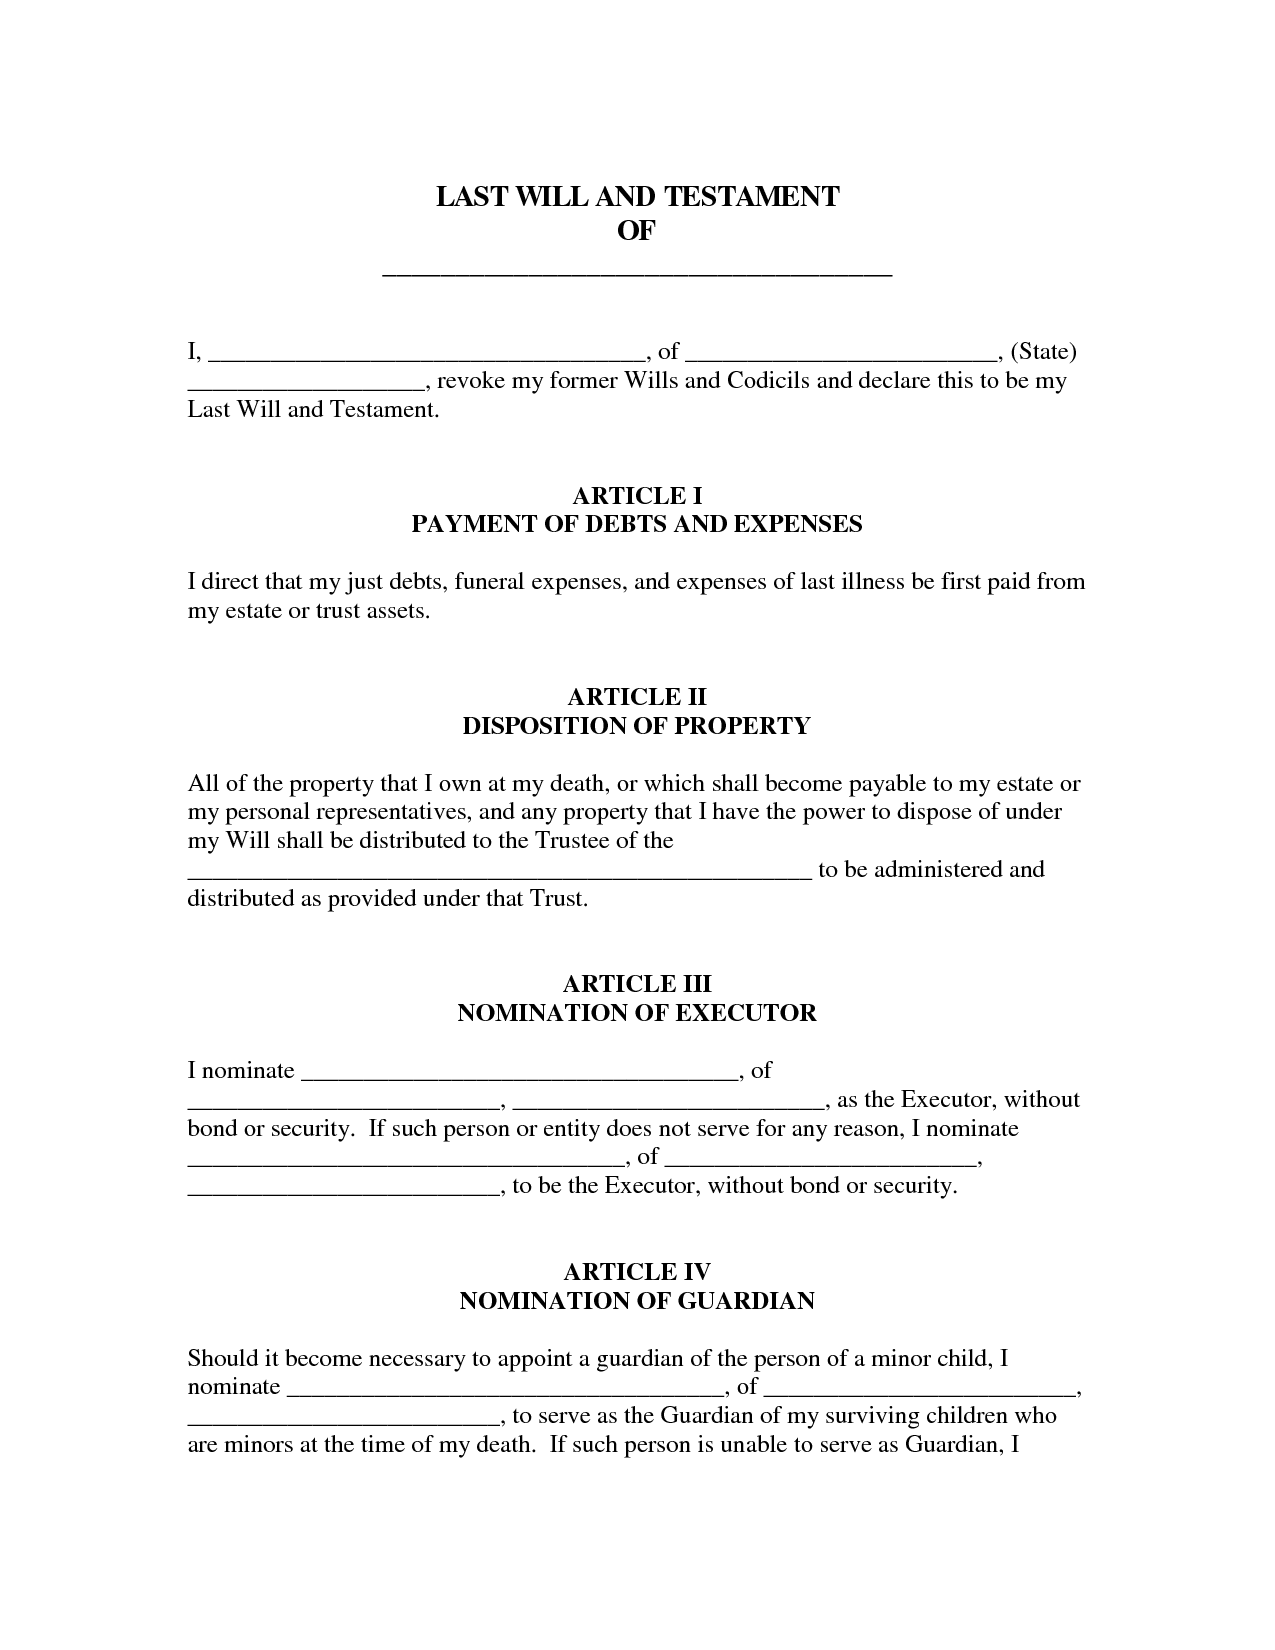 last-will-and-testament-template-free-printable-doctemplates